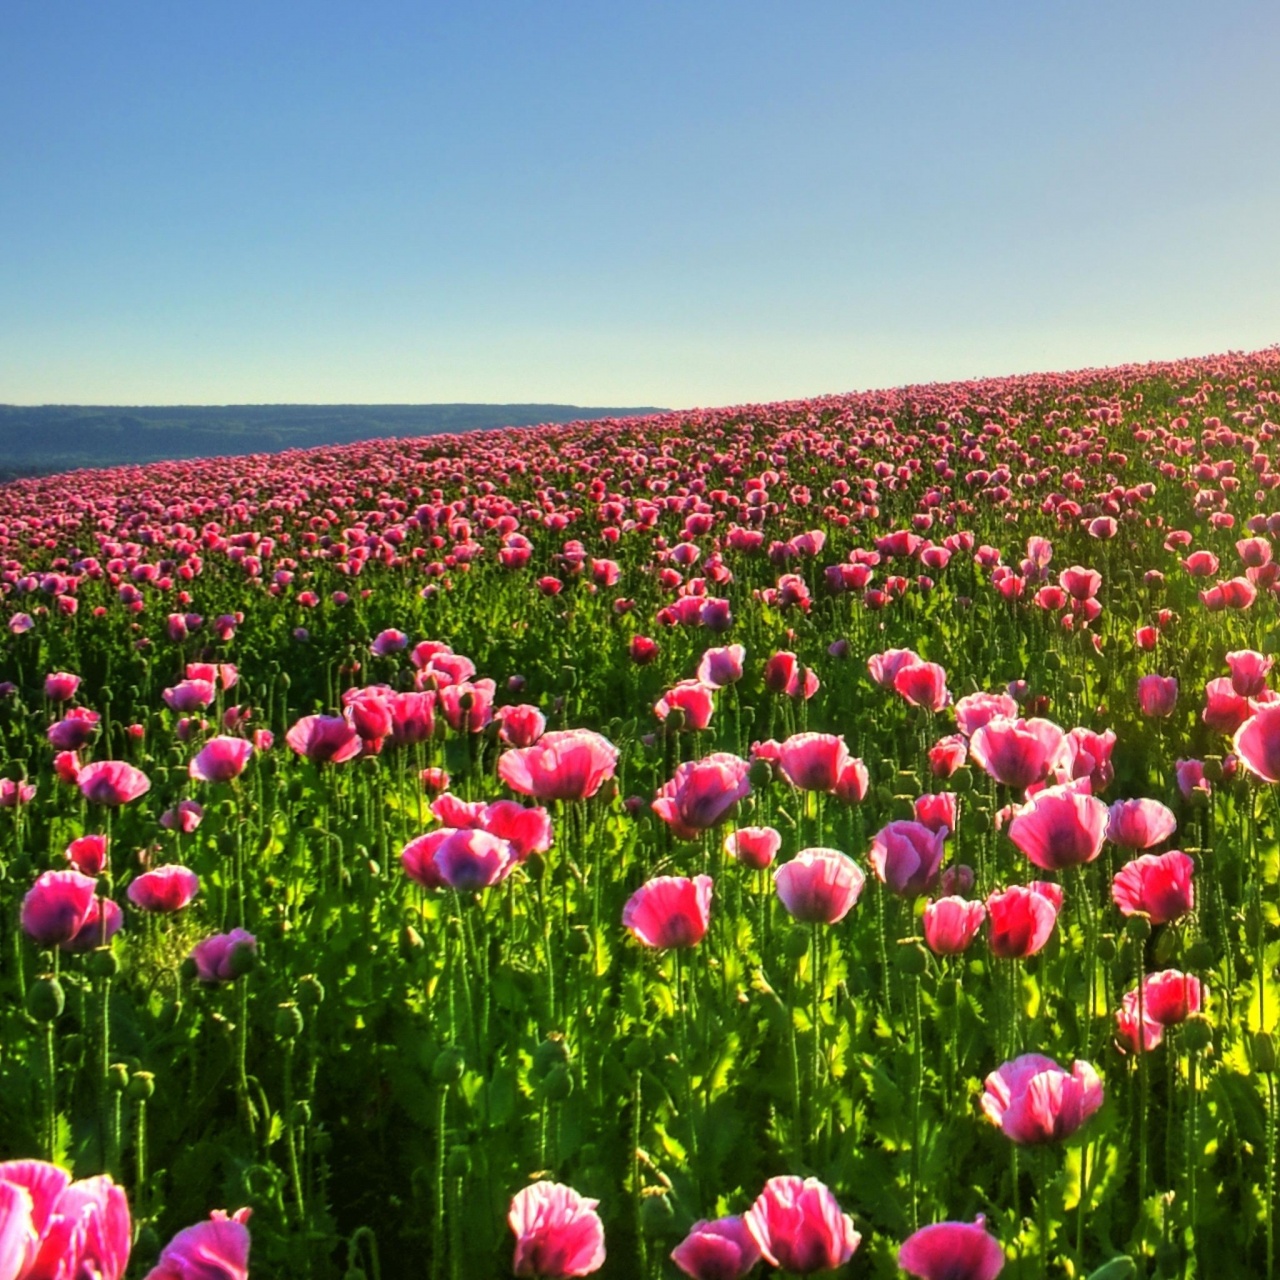 Field of Pink Poppies